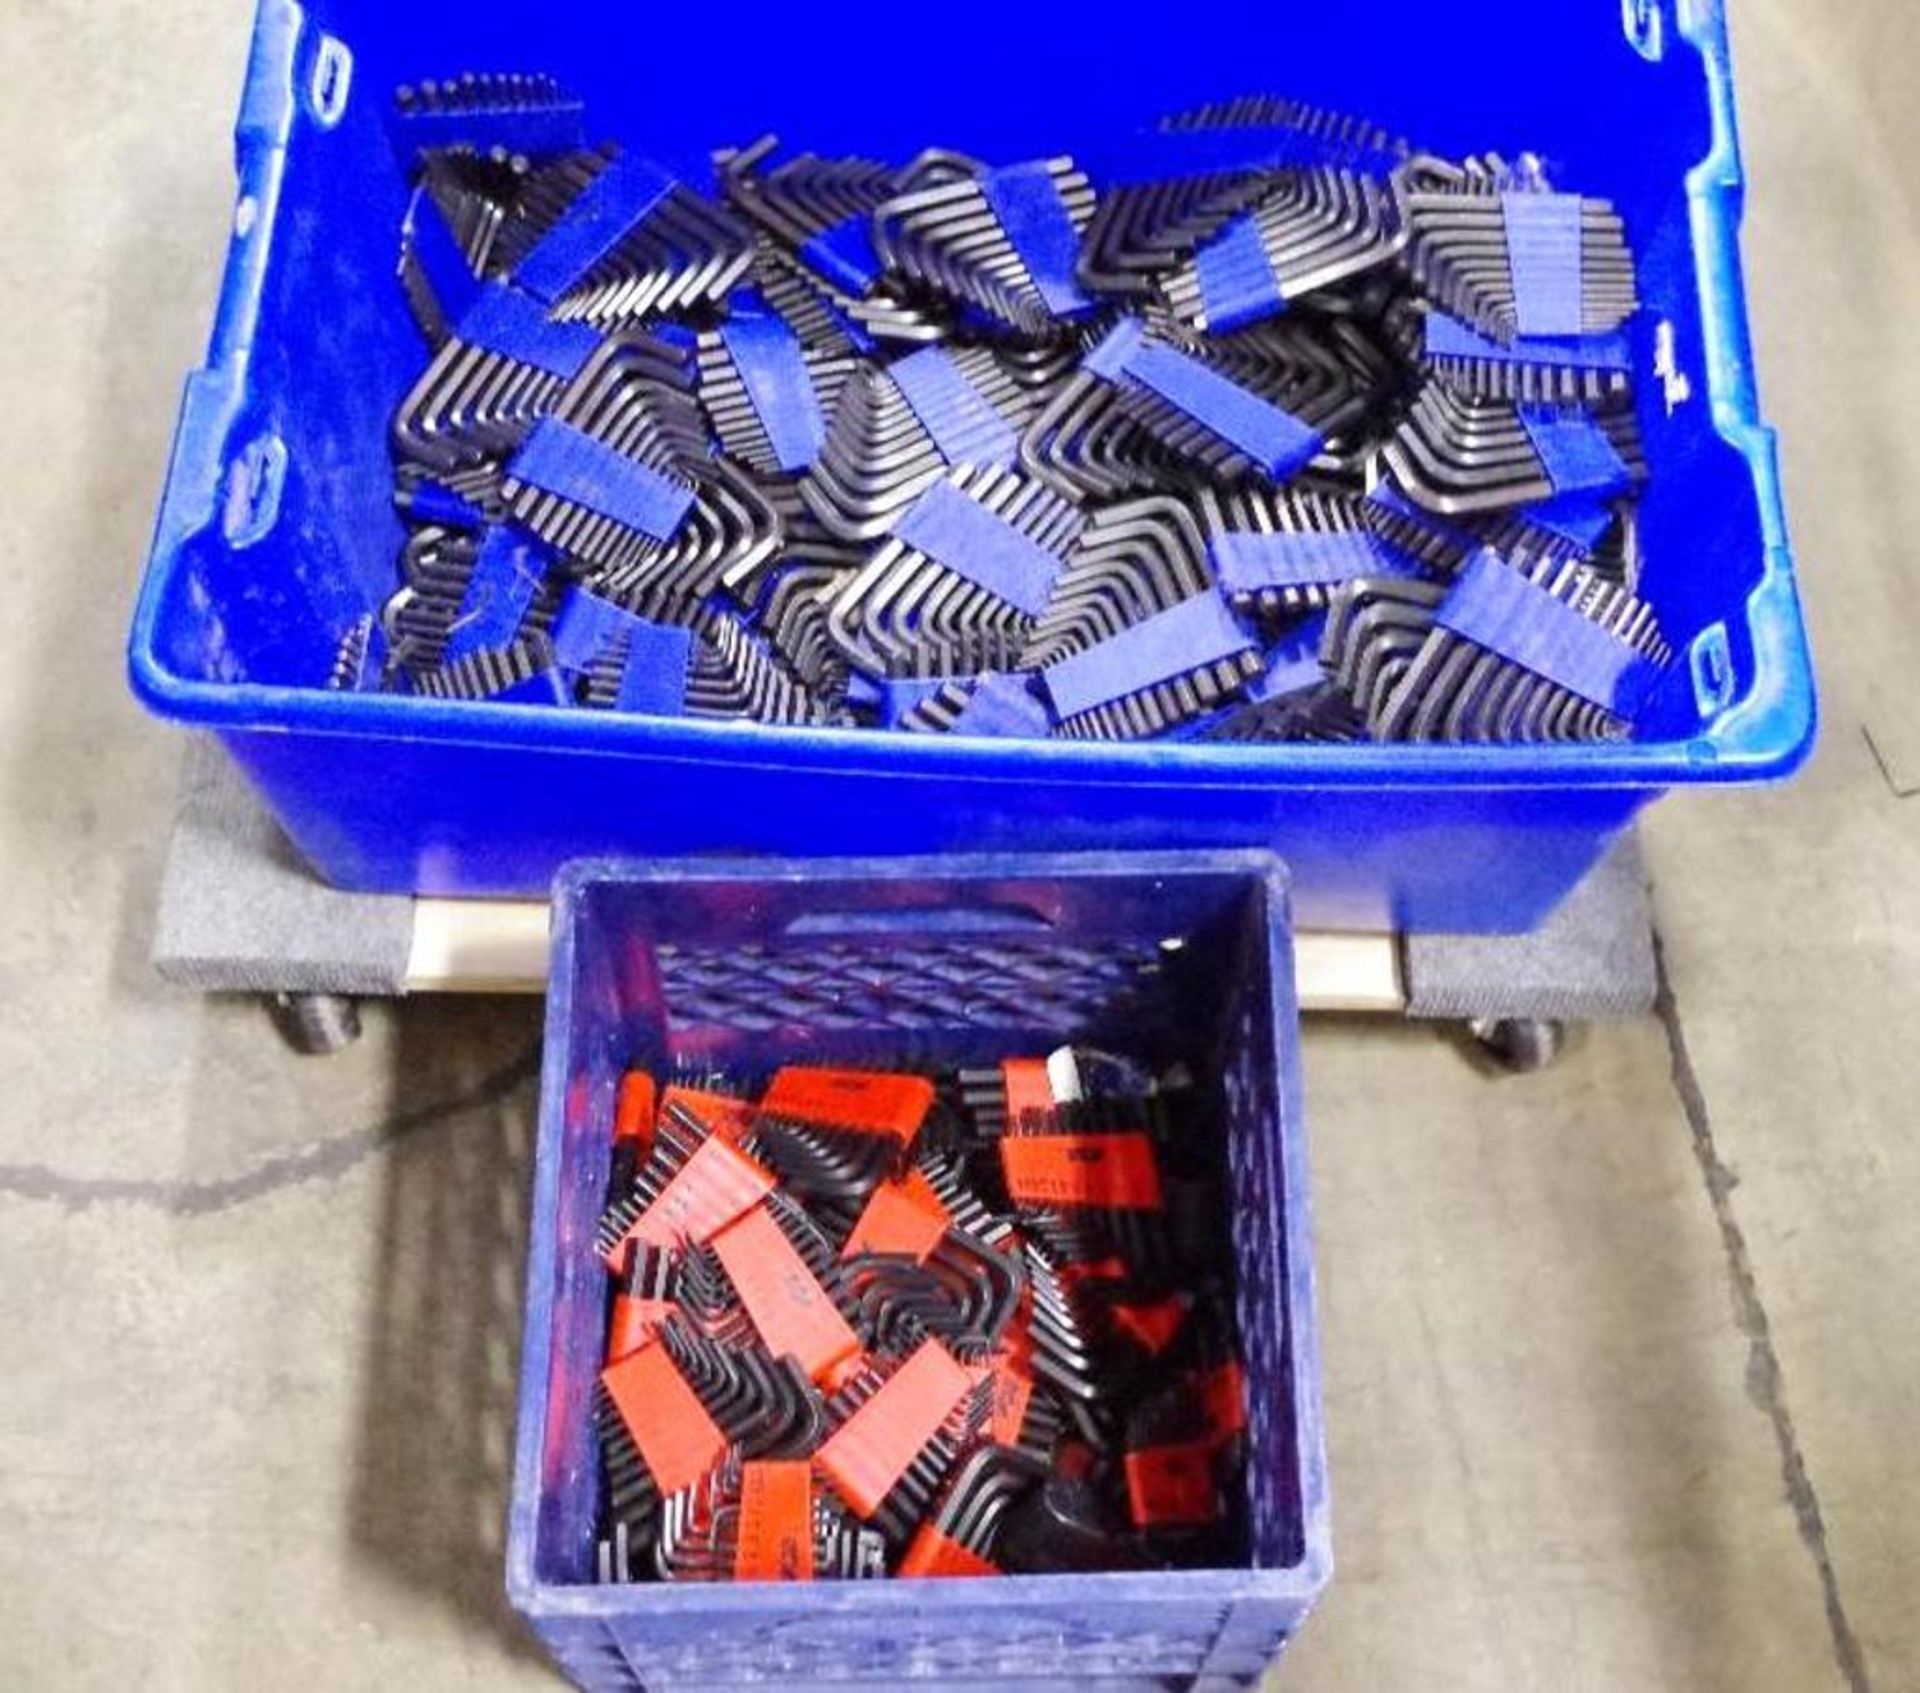 ***RESELLER SPECIAL*** [2] Bins of BLUE HAWK Allen Wrenches: (1) Metric & (1) SAE